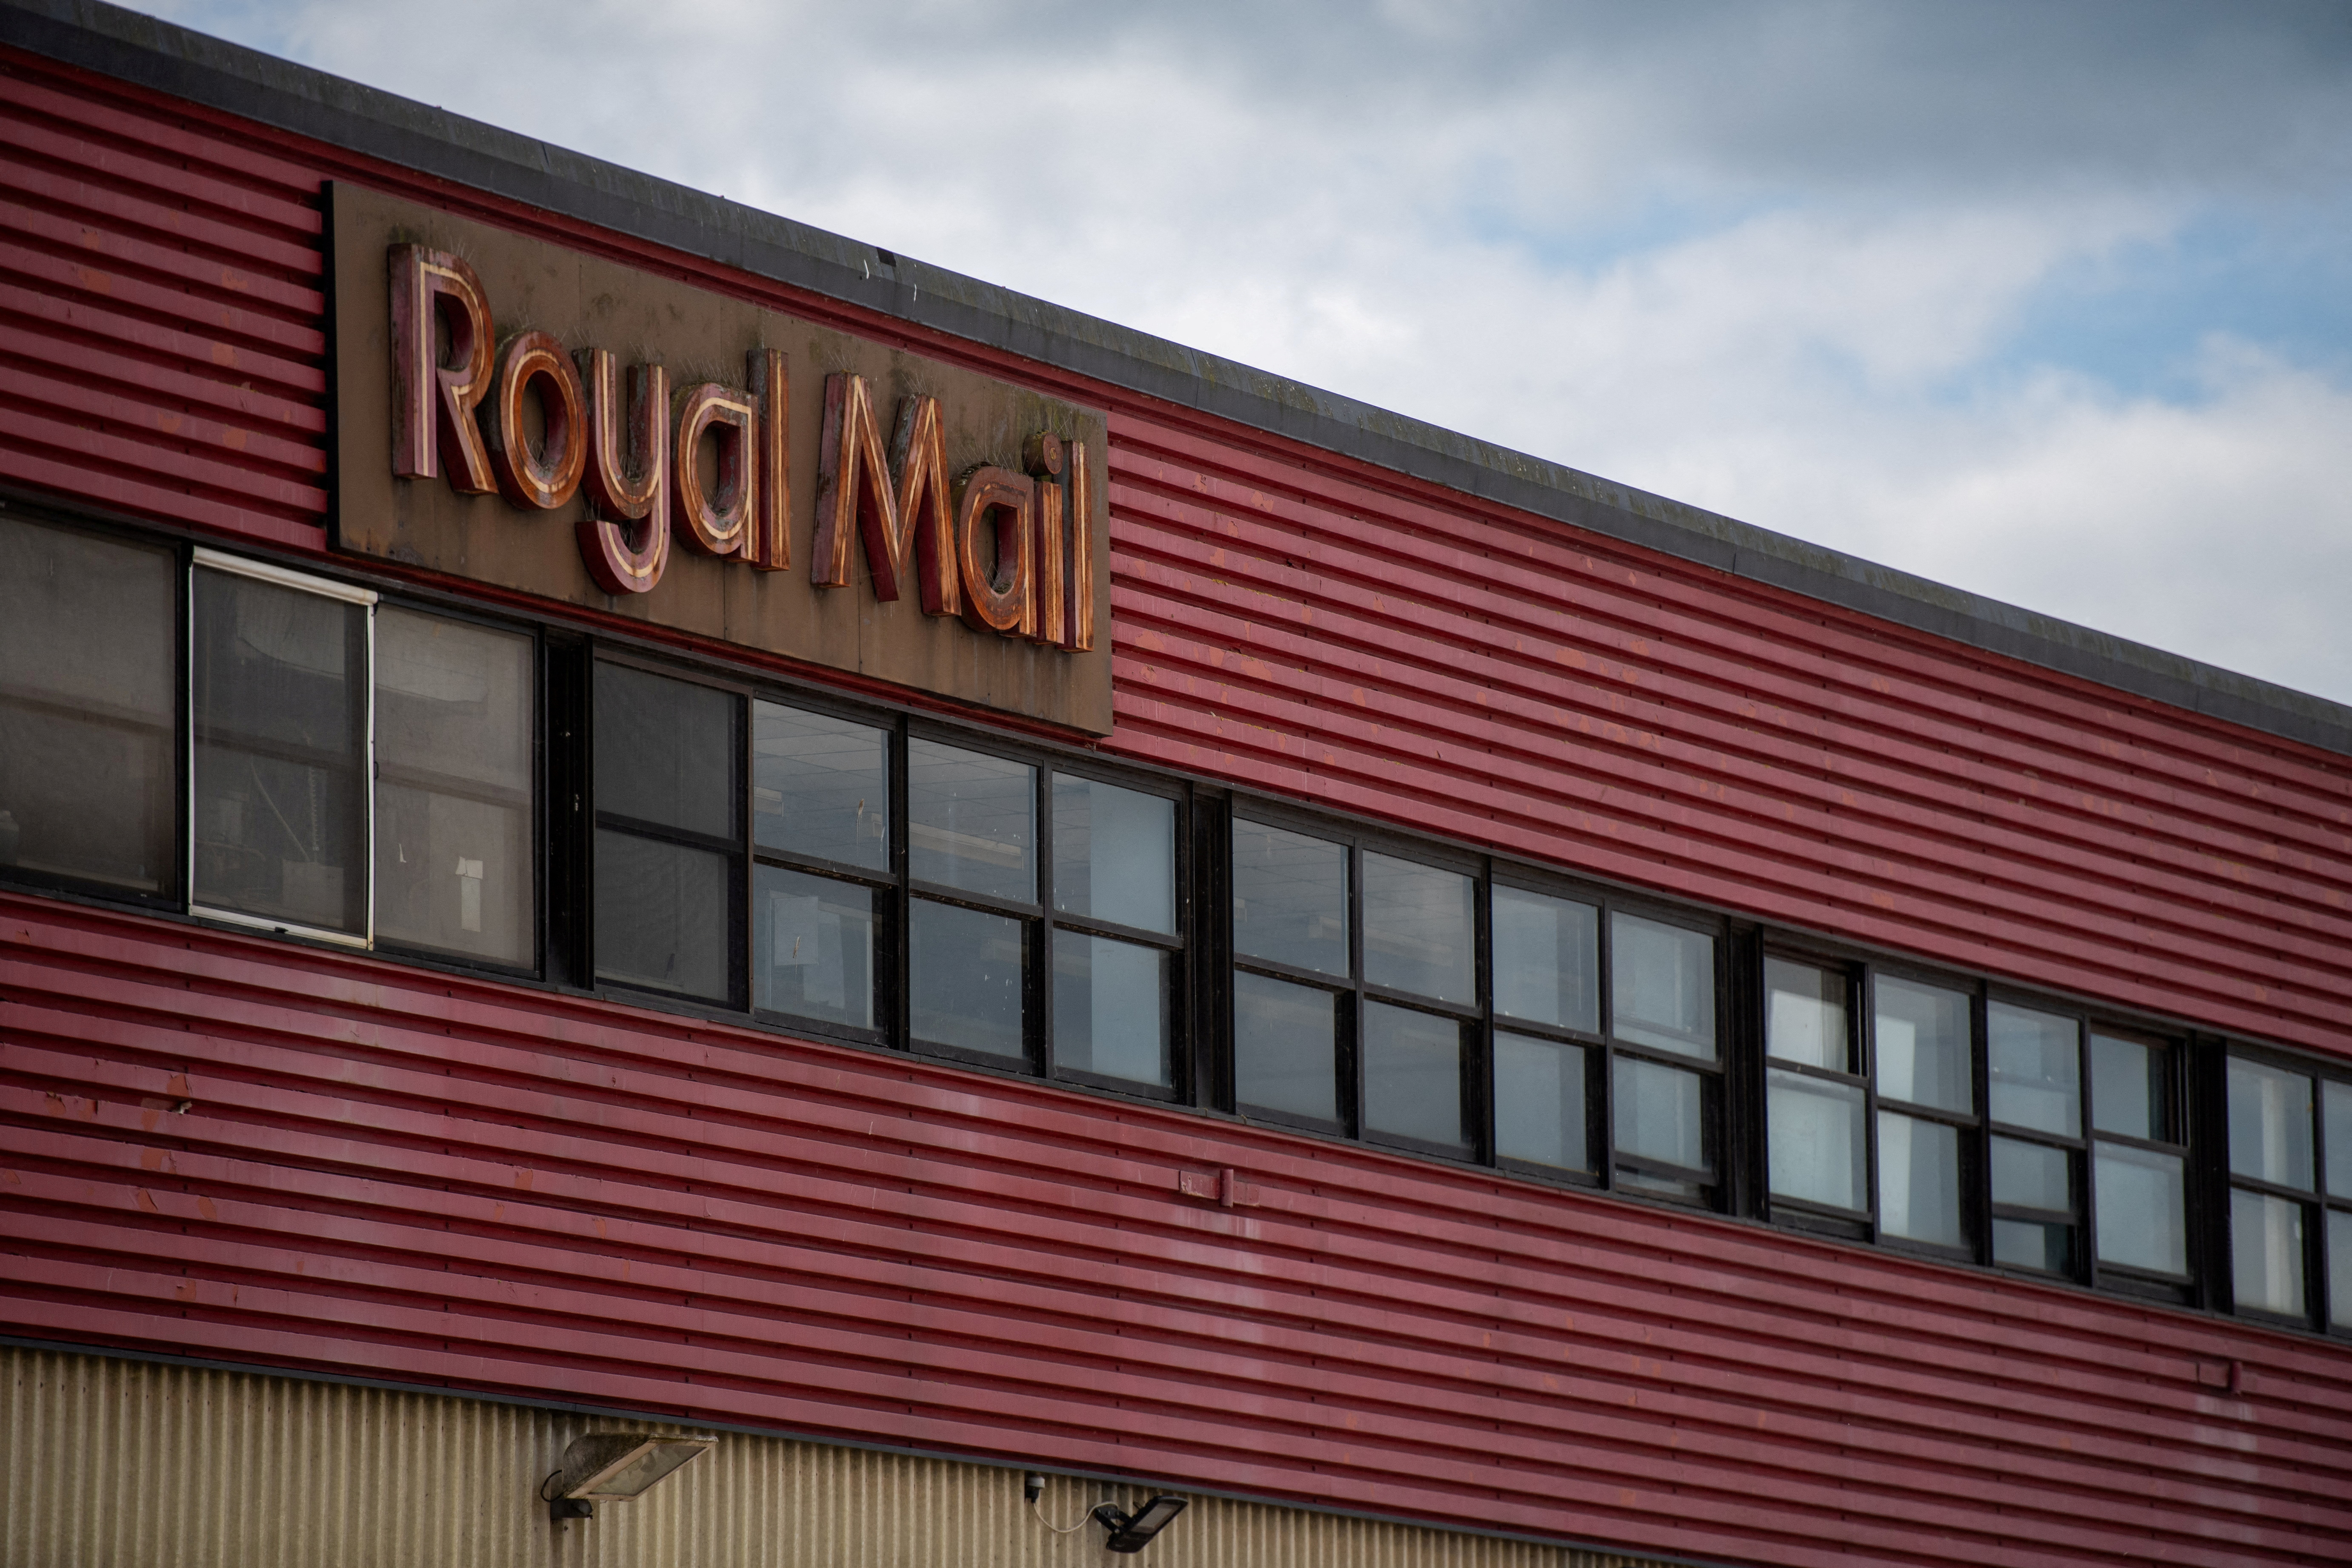 Royal Mail takeover: Potential benefits and risks to the UK’s National Postal Service